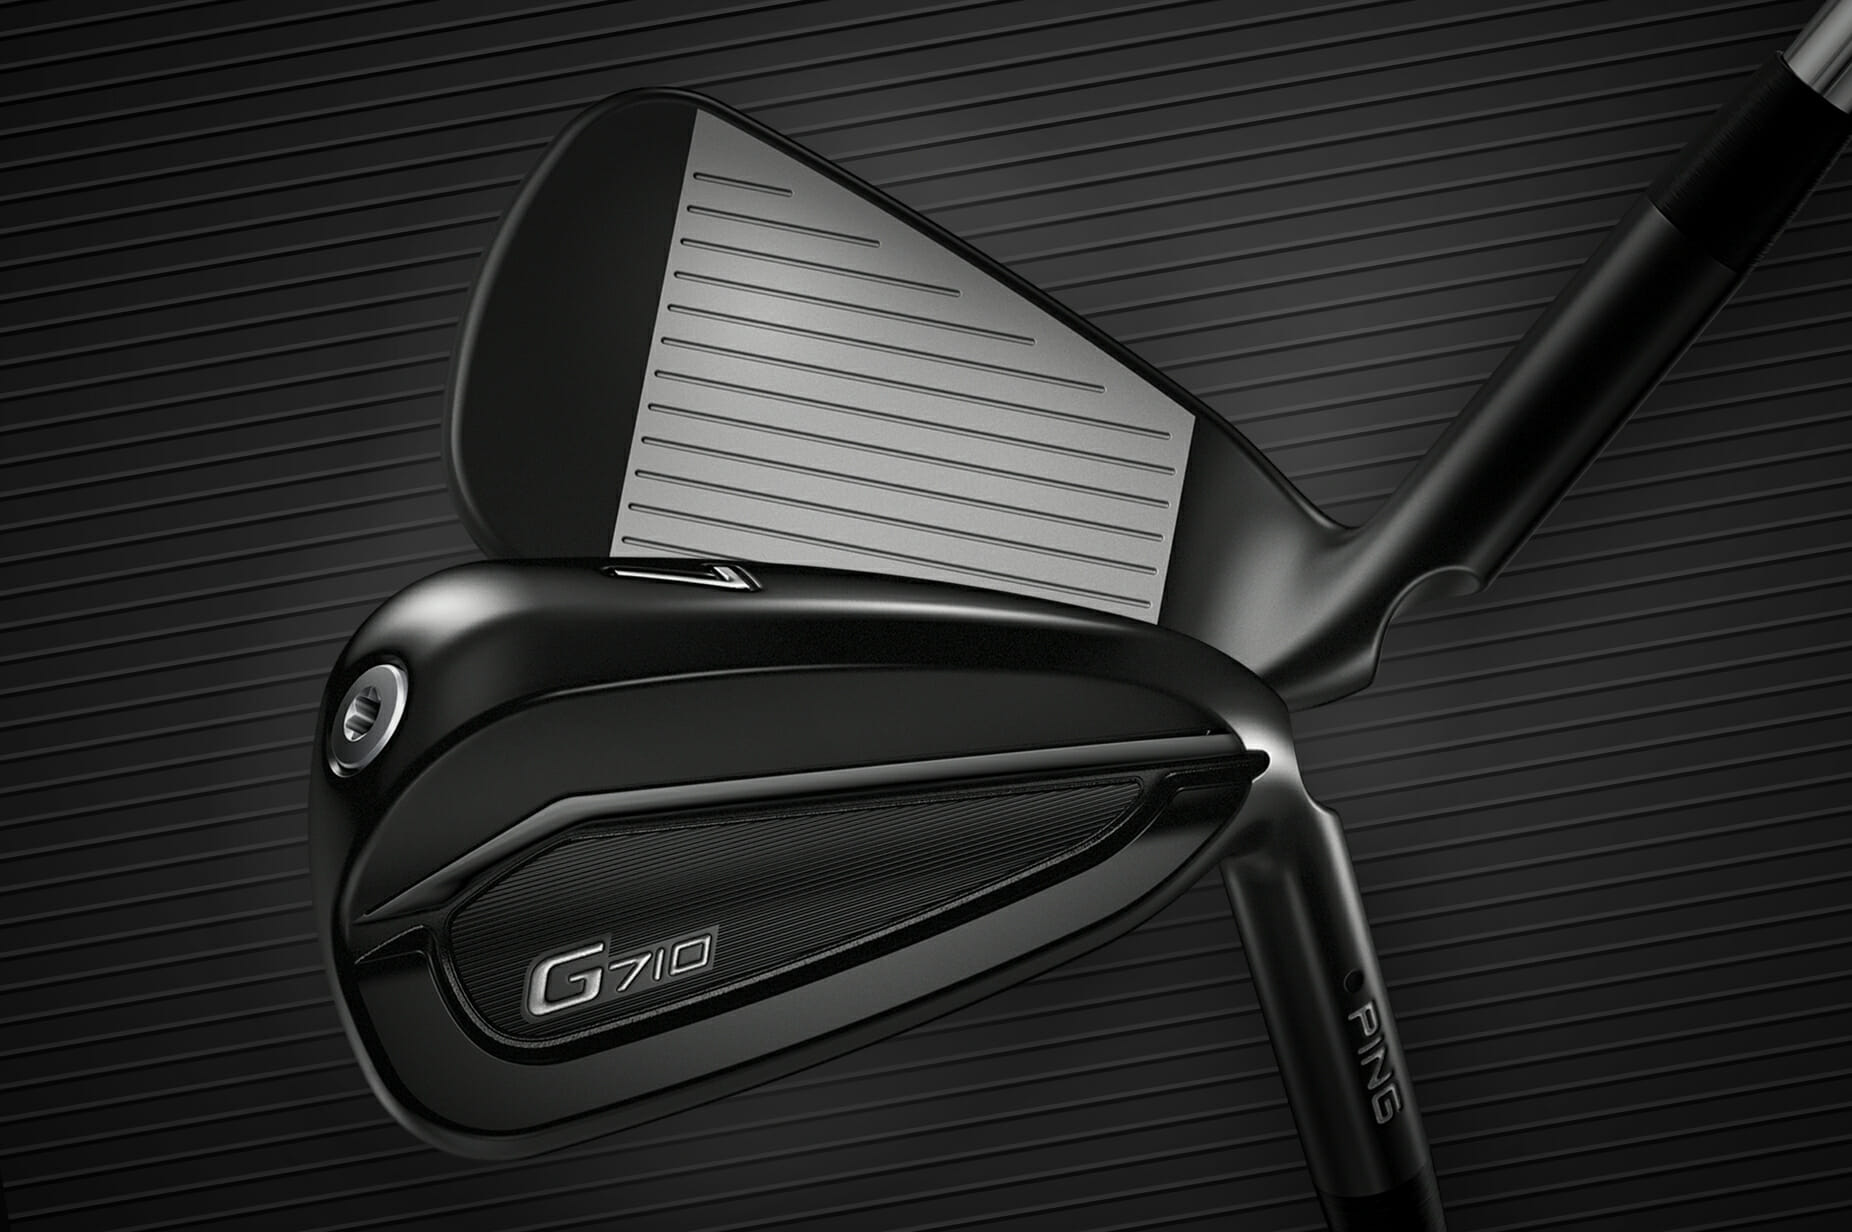 PING introduces G710 distance iron with Arccos Smart Grips